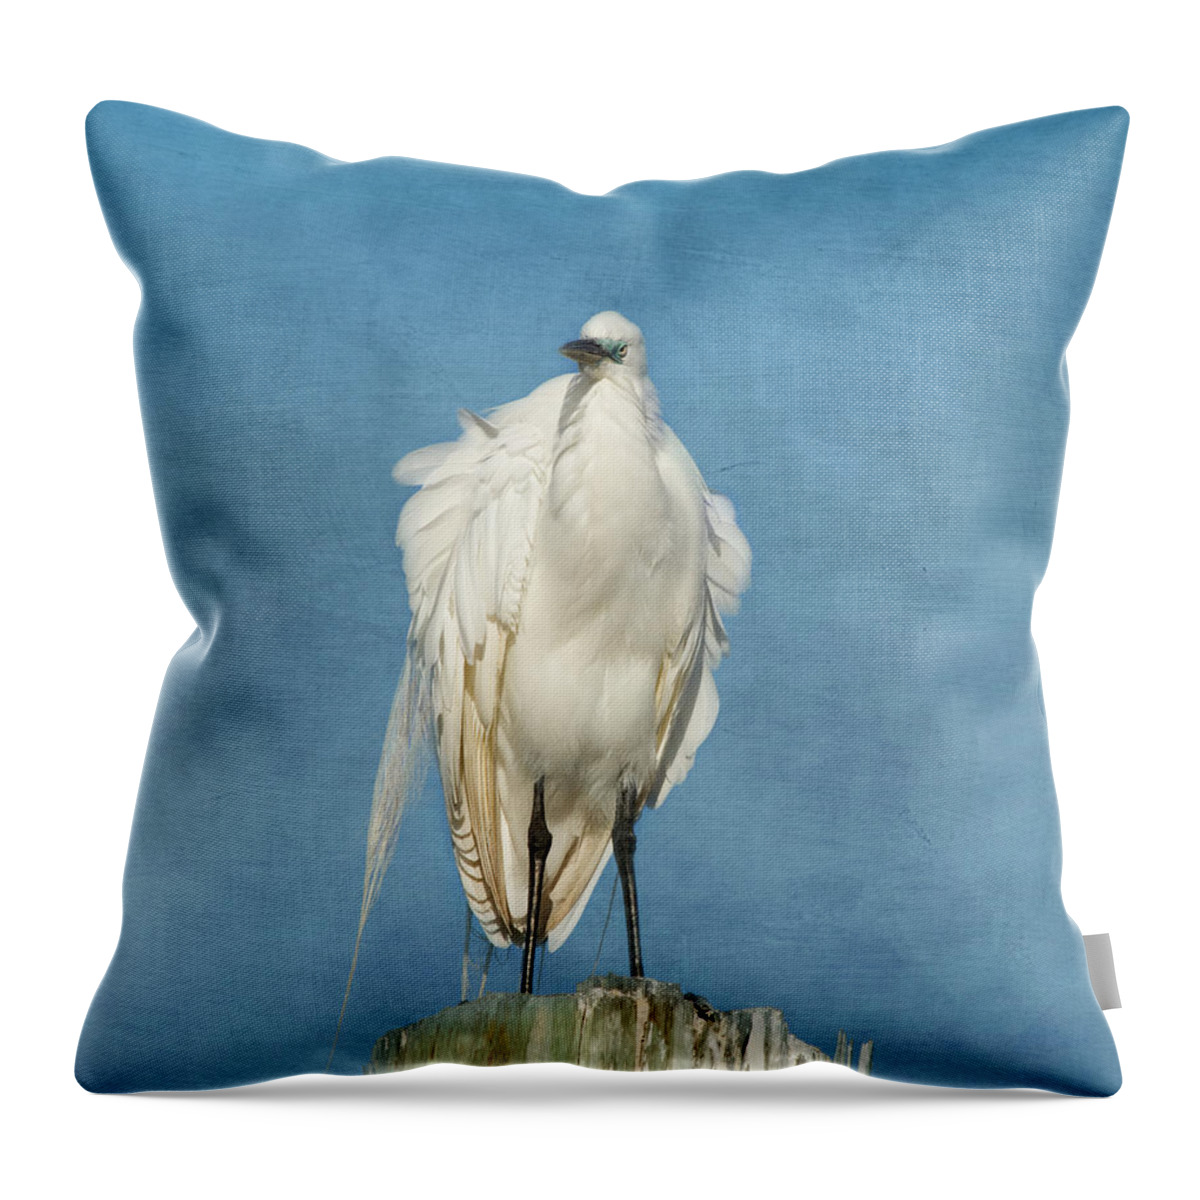 Egret Throw Pillow featuring the photograph The Great One by Kim Hojnacki